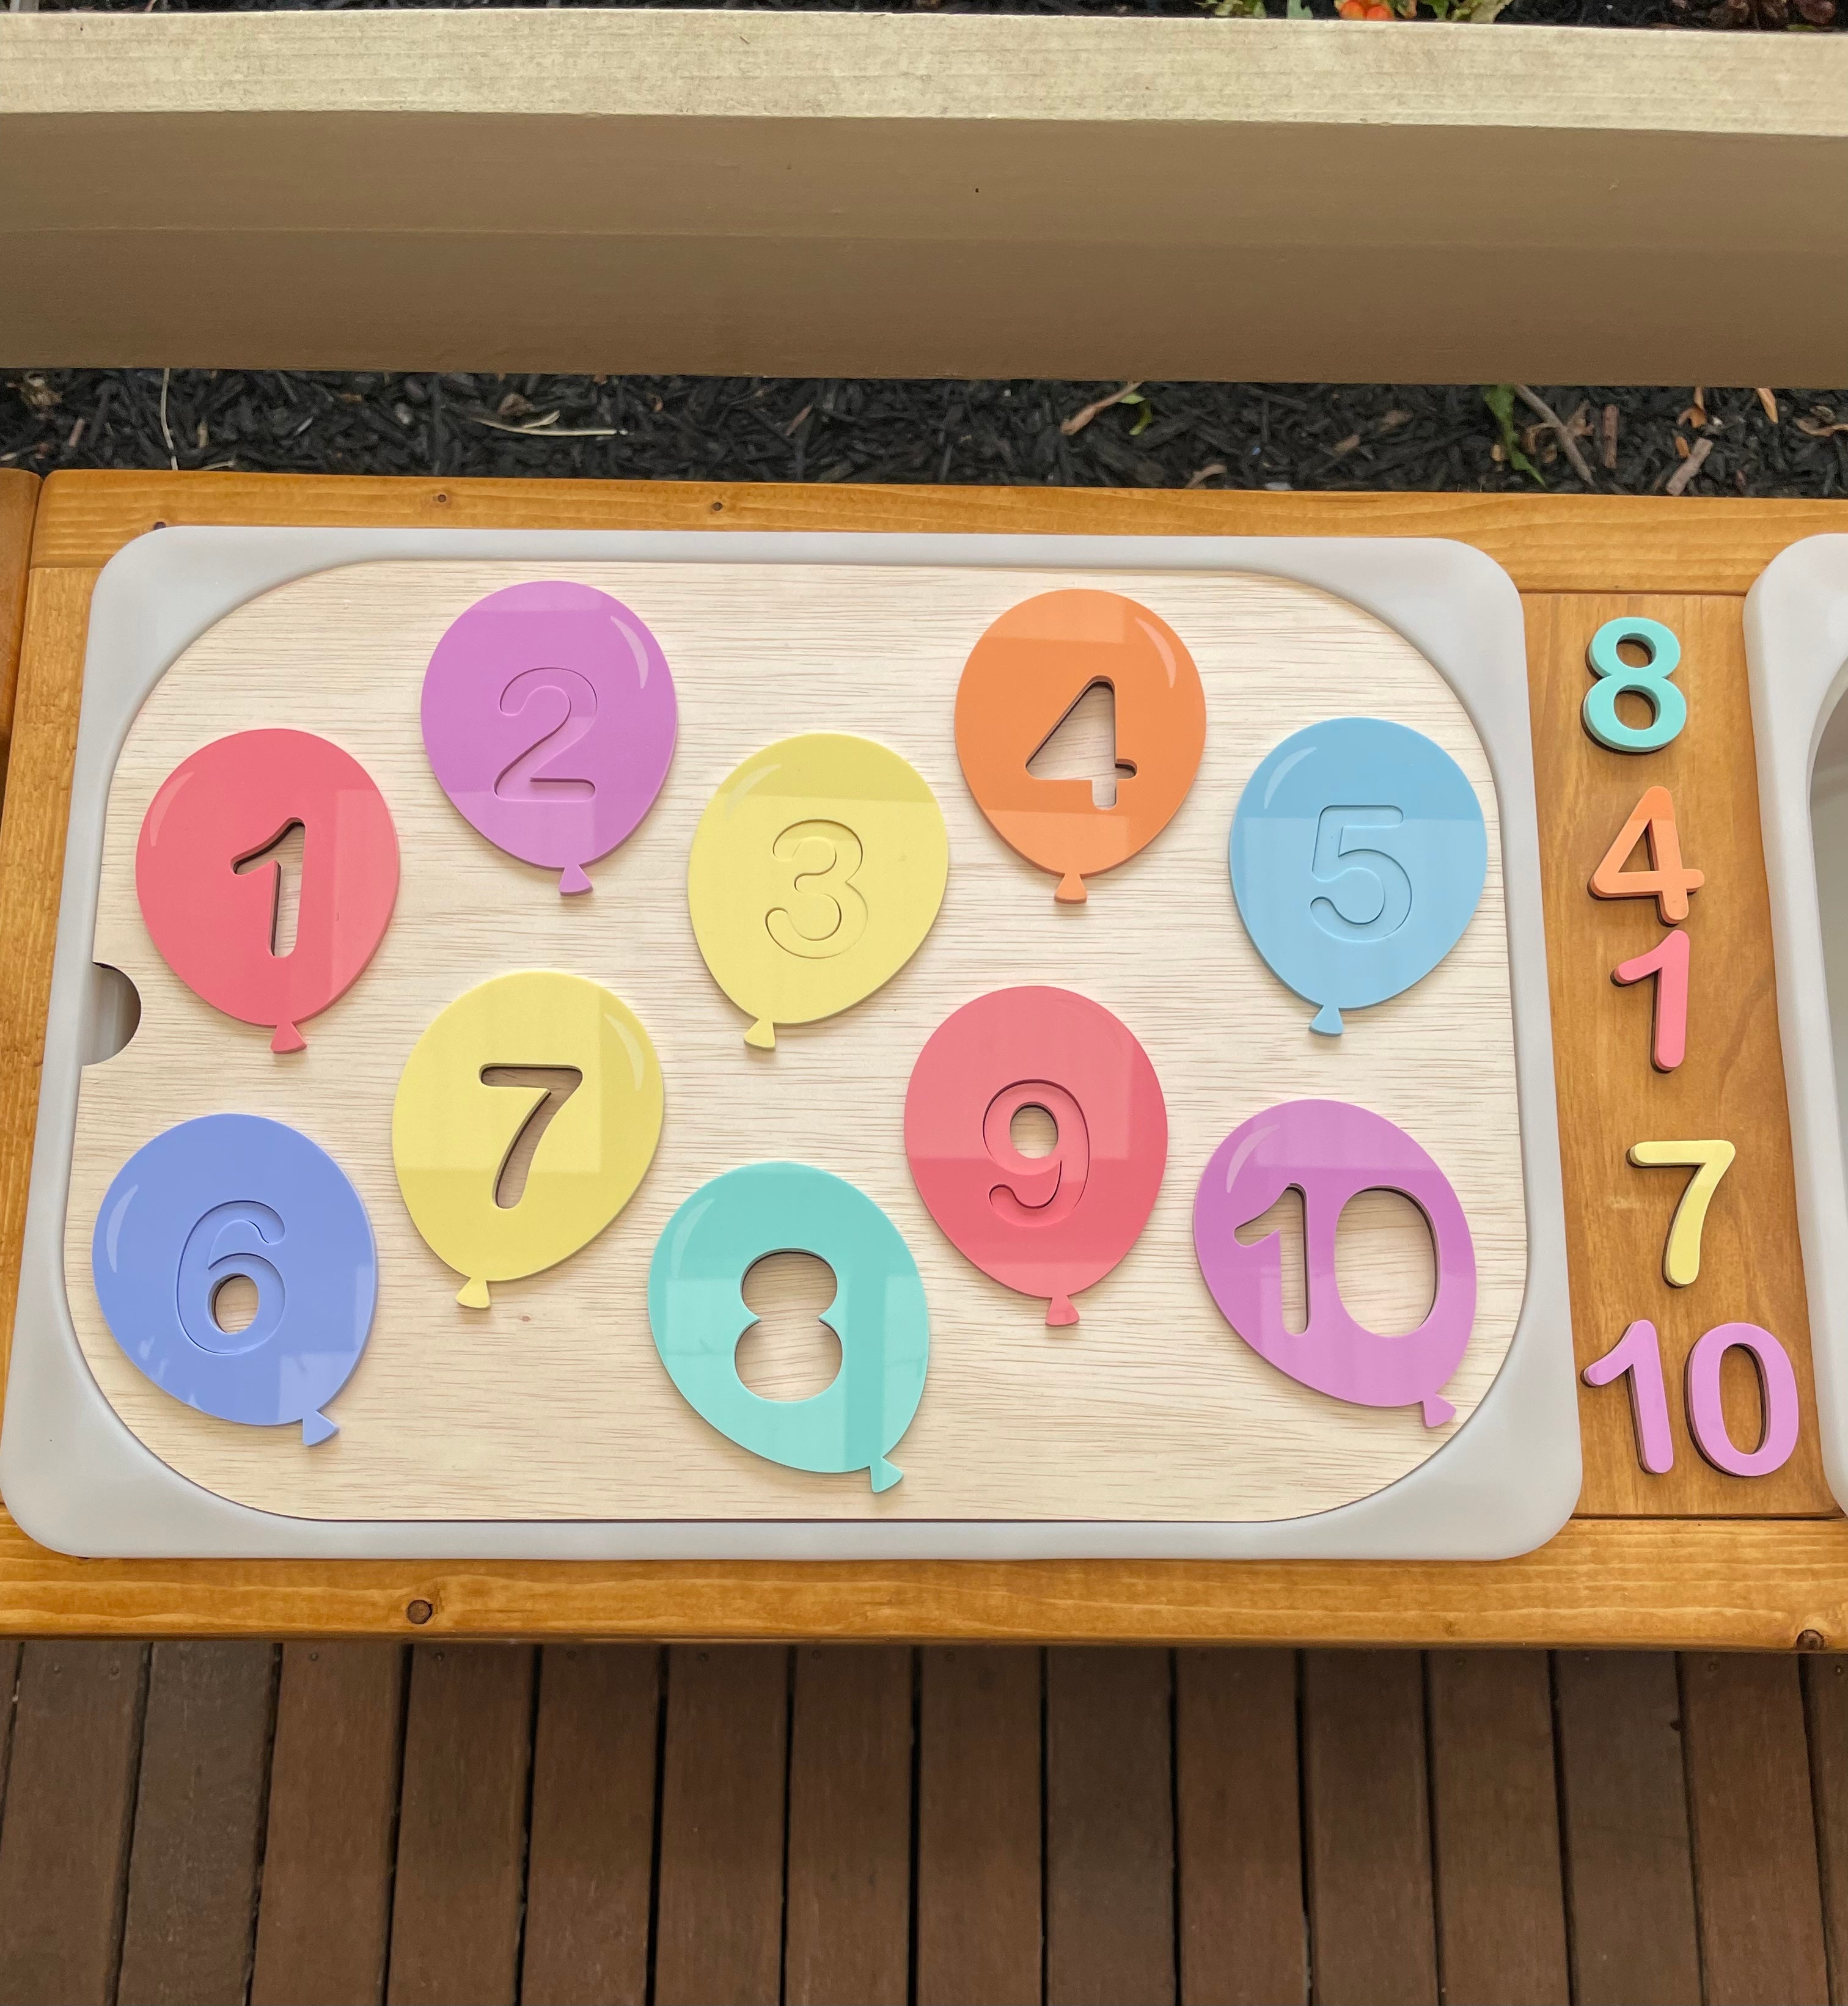 Trofast Insert - Balloon Number Puzzle - large